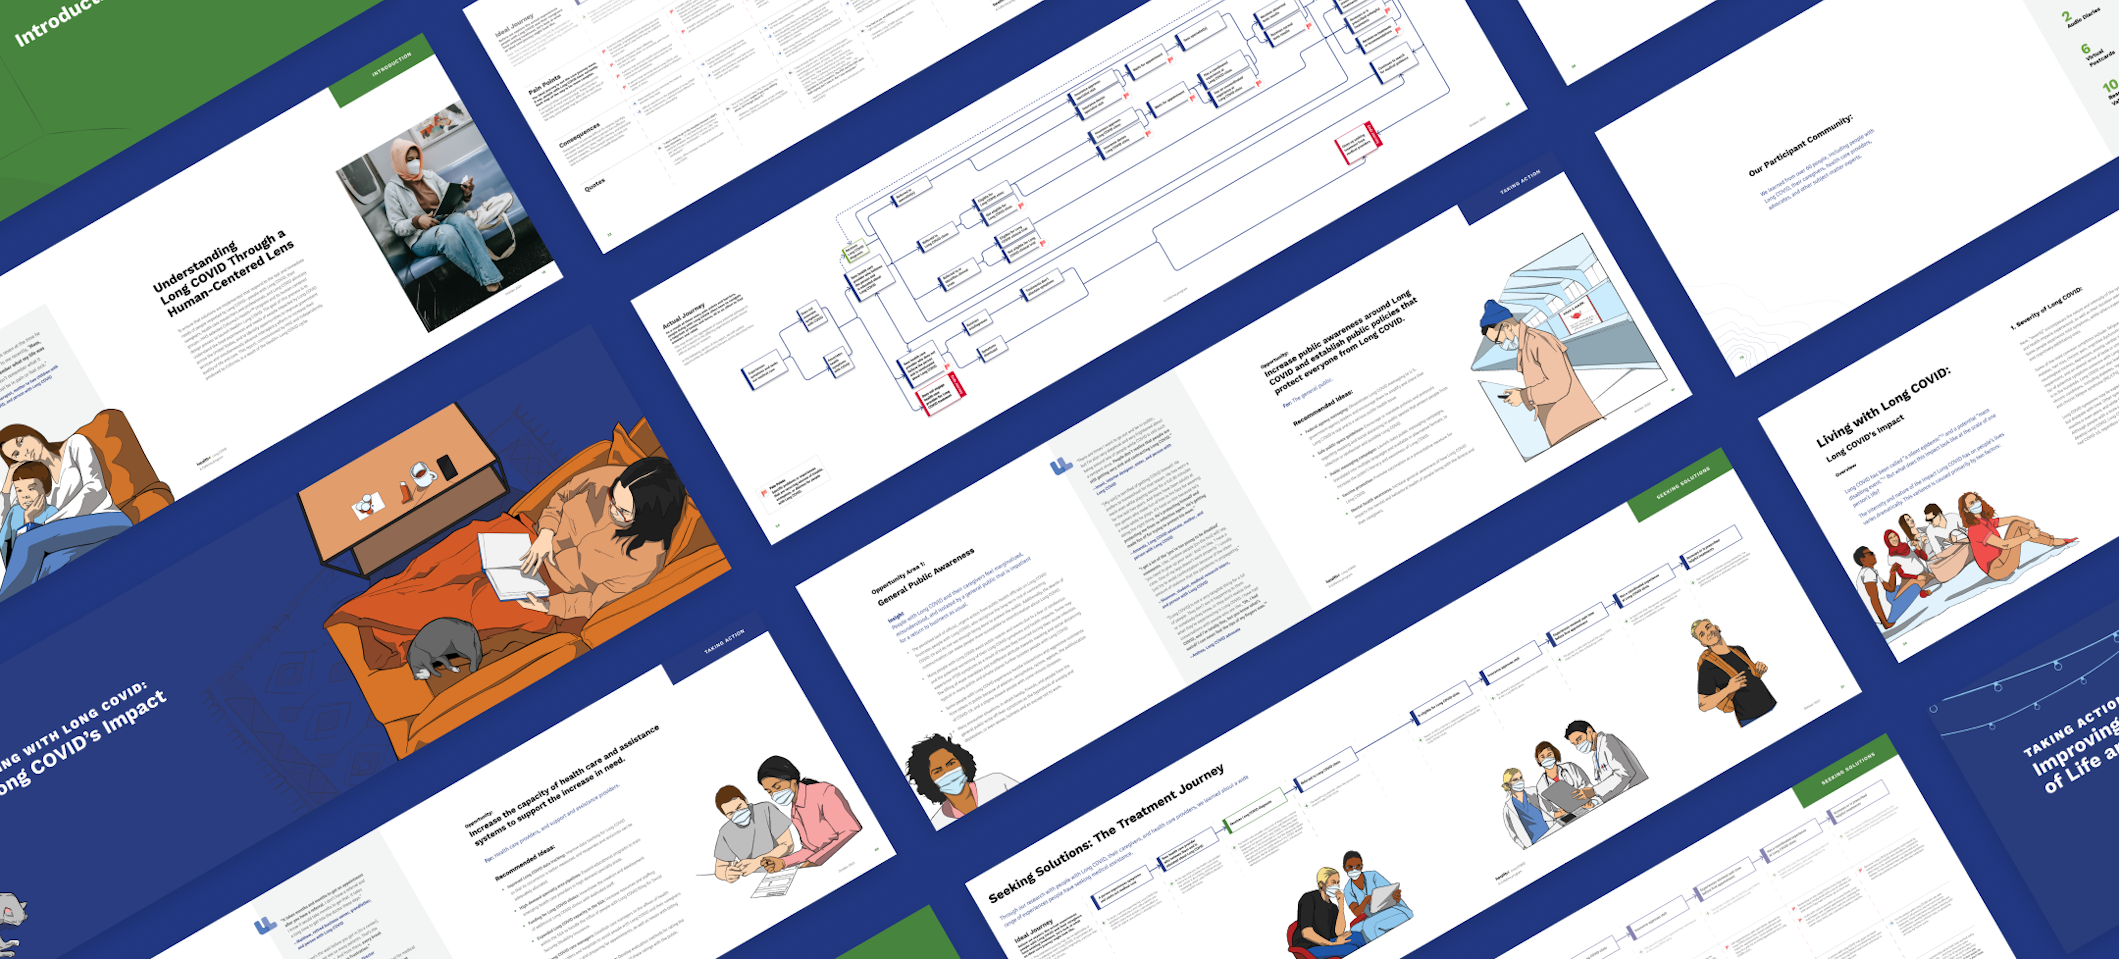 A grid of spreads from the Coforma Health Plus Long COVID report at a 30 degree angle on a dark blue background.